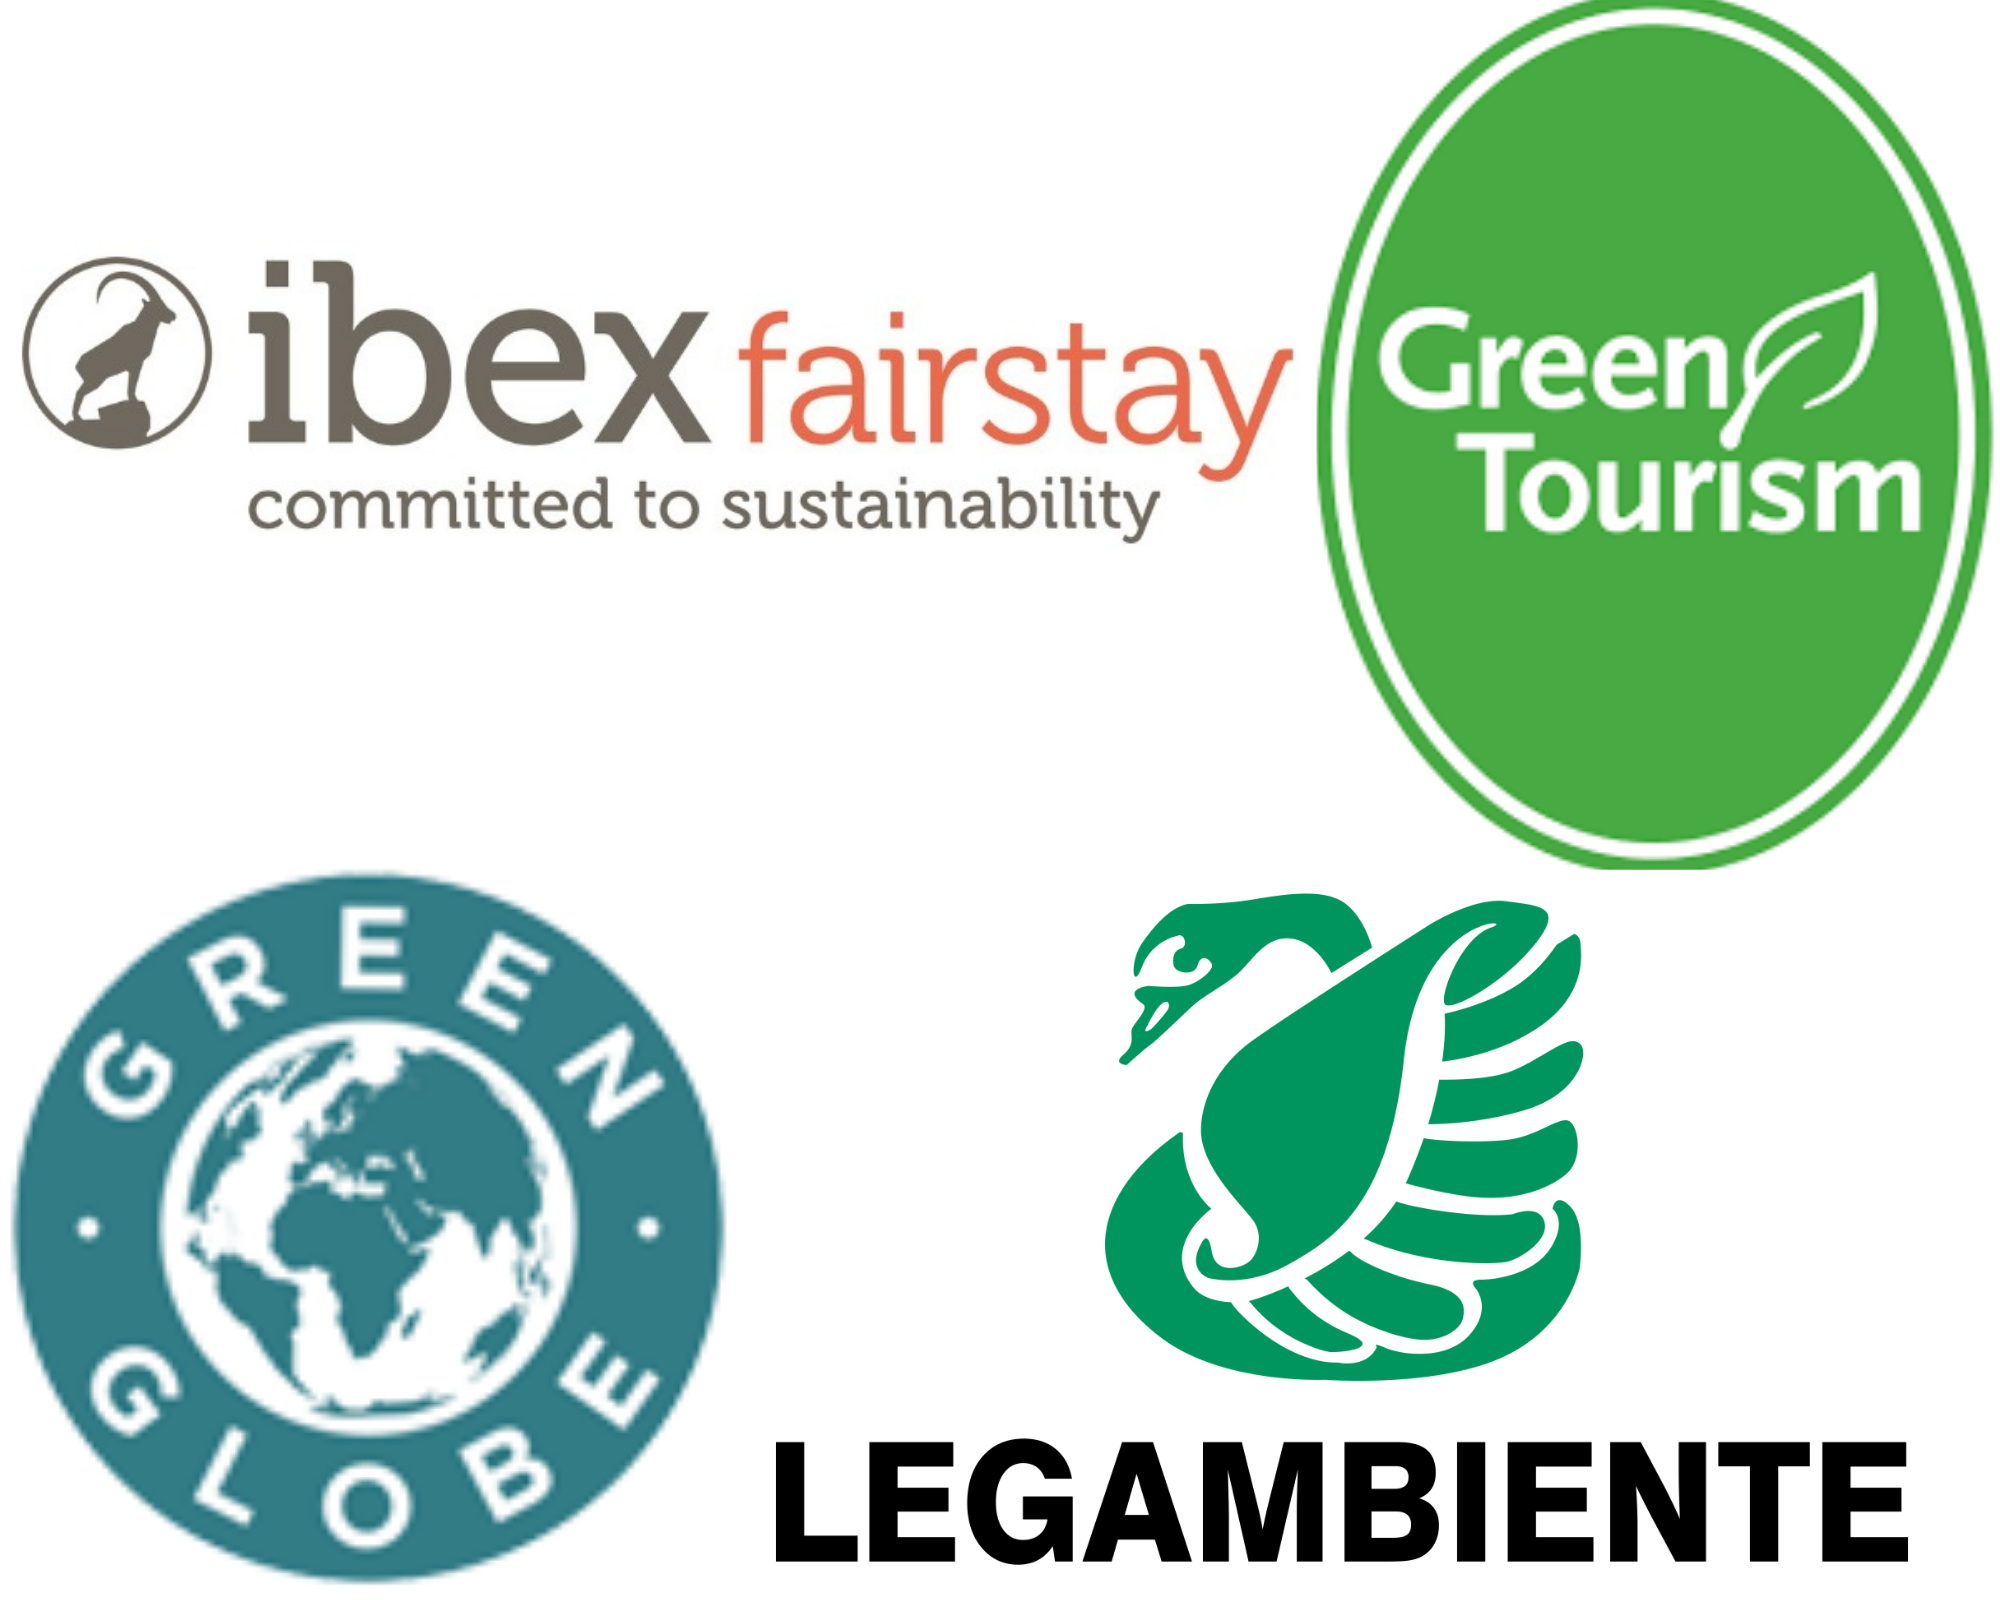 eco labels in tourism